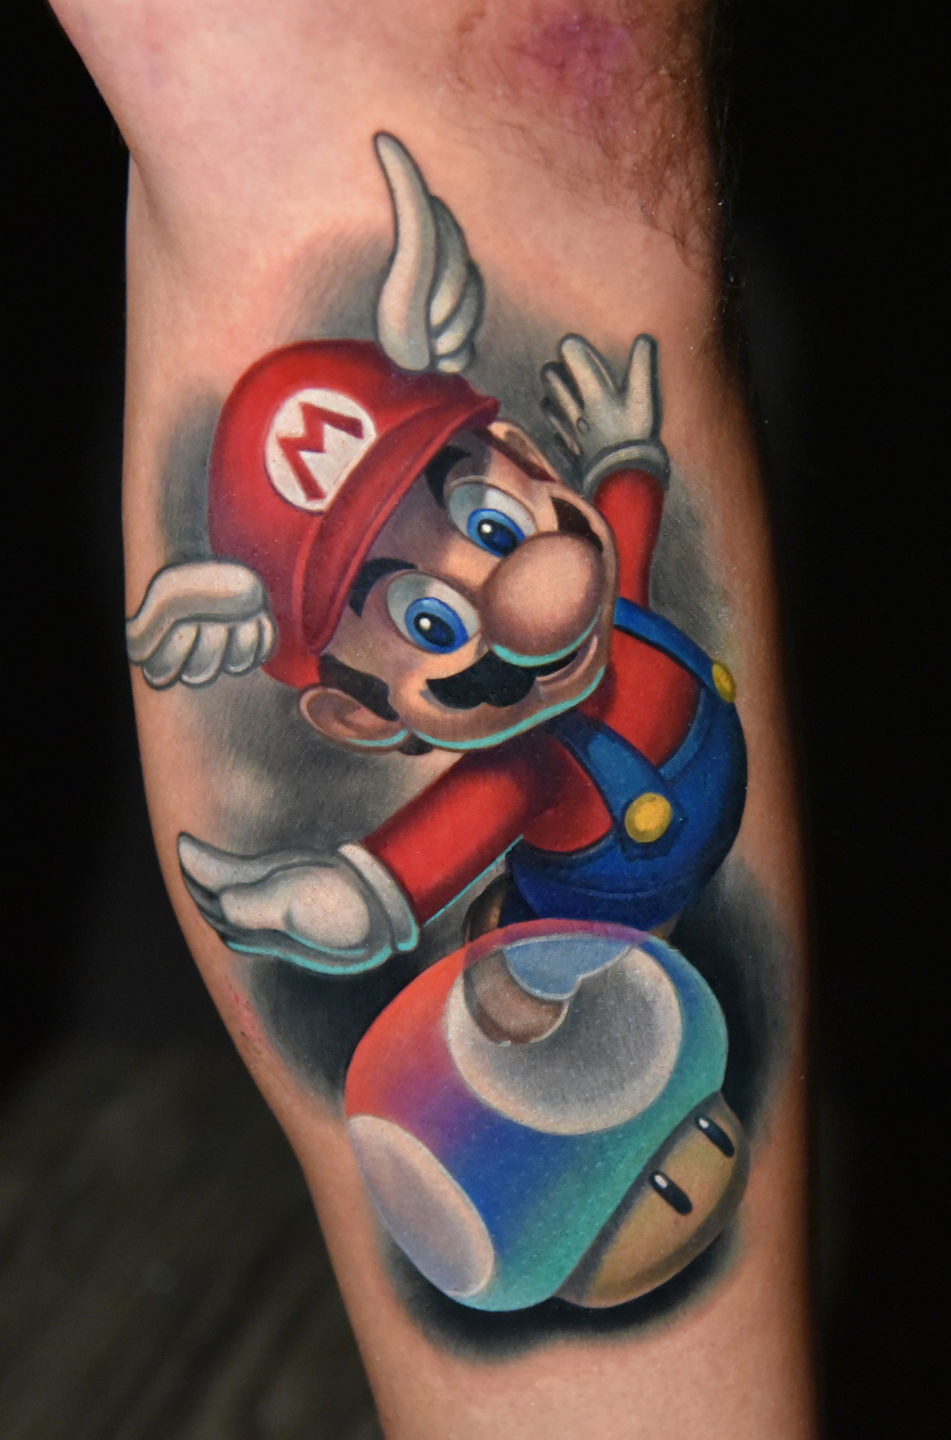 Super Mario Tattoo  My newest tattoo flying Mario from Sup  Flickr